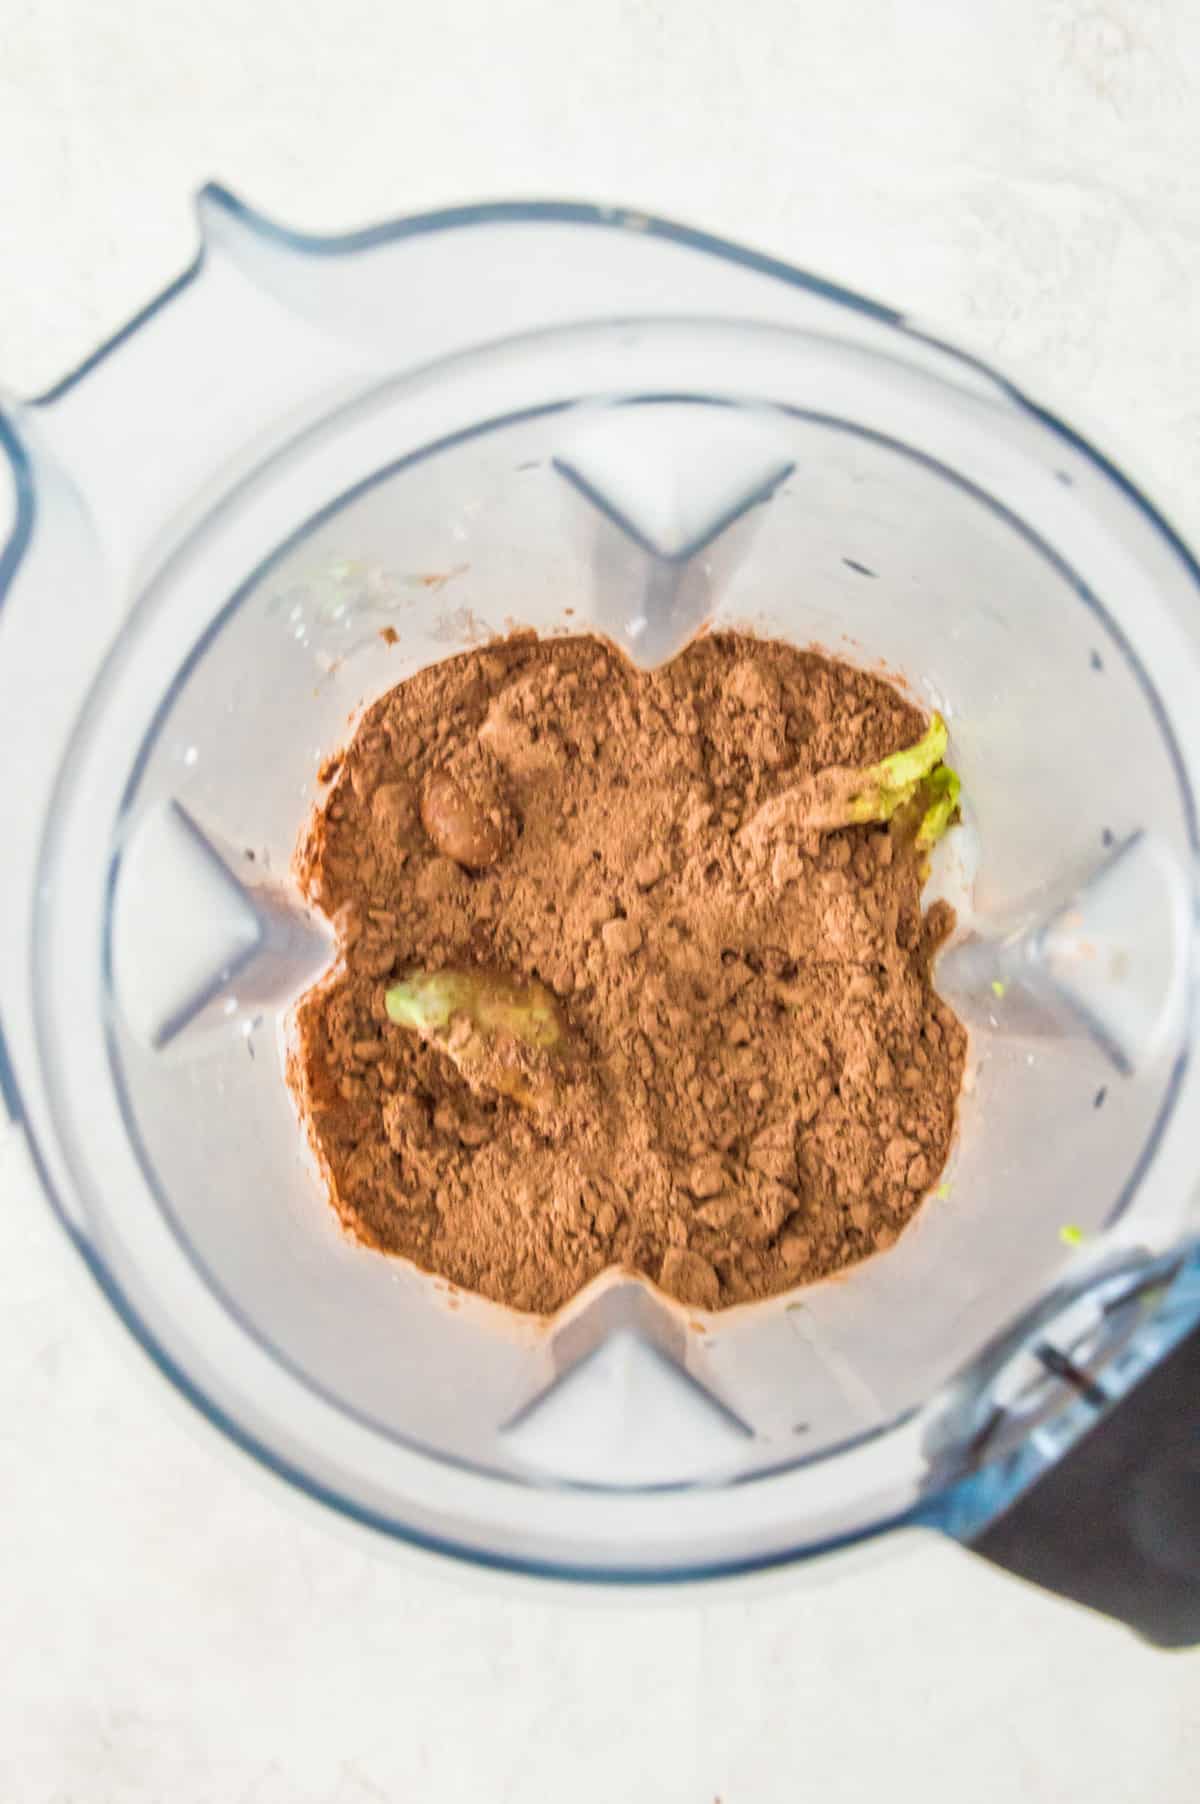 Cocoa powder and avocado in a blender.